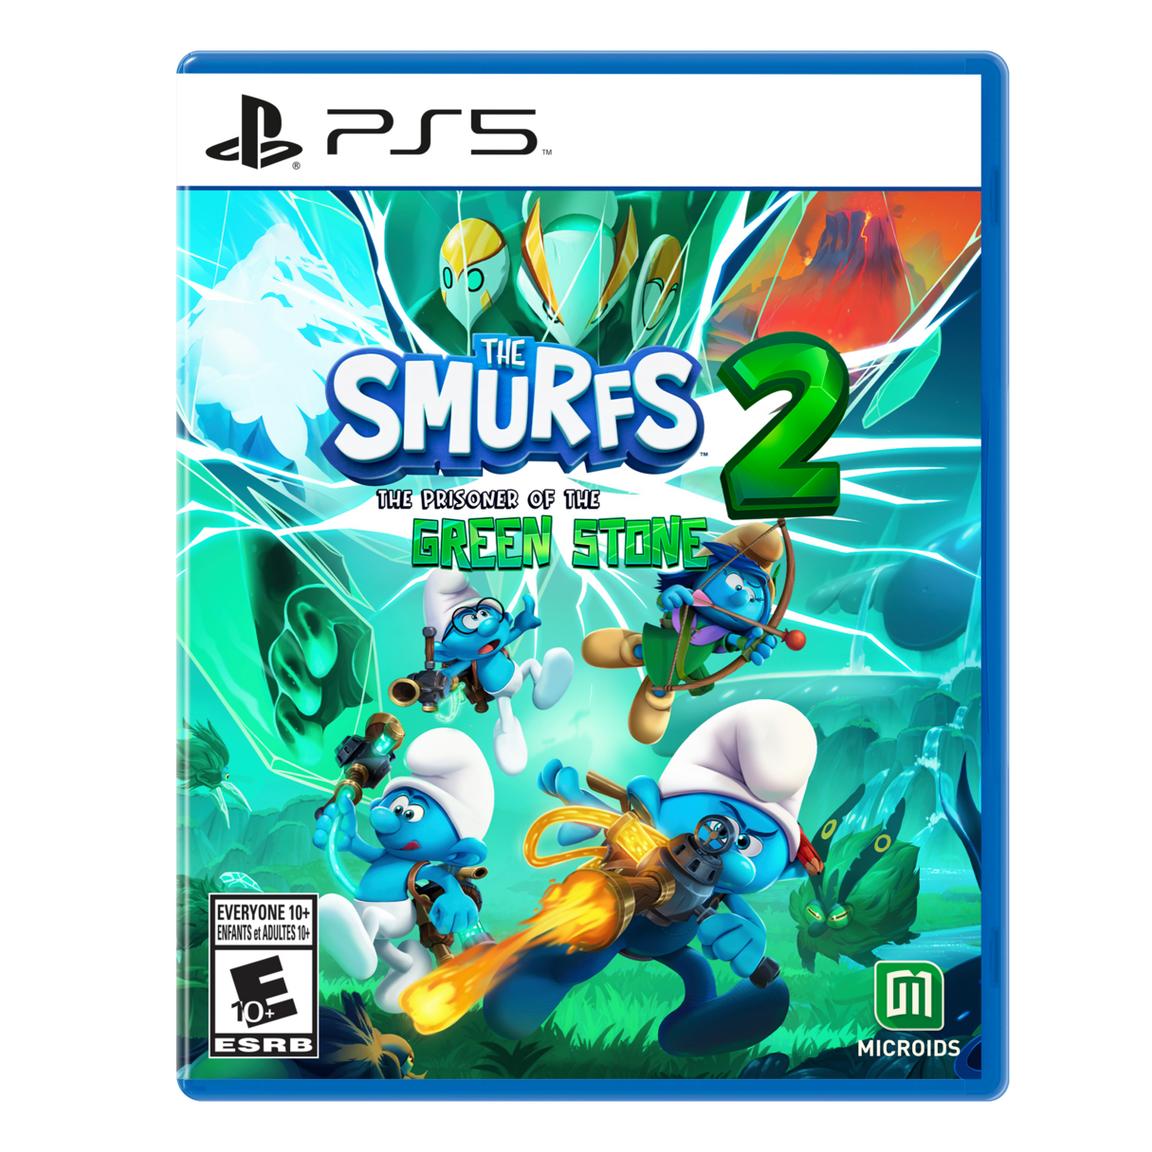 Видеоигра The Smurfs 2: Prisoner of the Green Stone - PlayStation 5 ps5 игра microids sifu limited edition